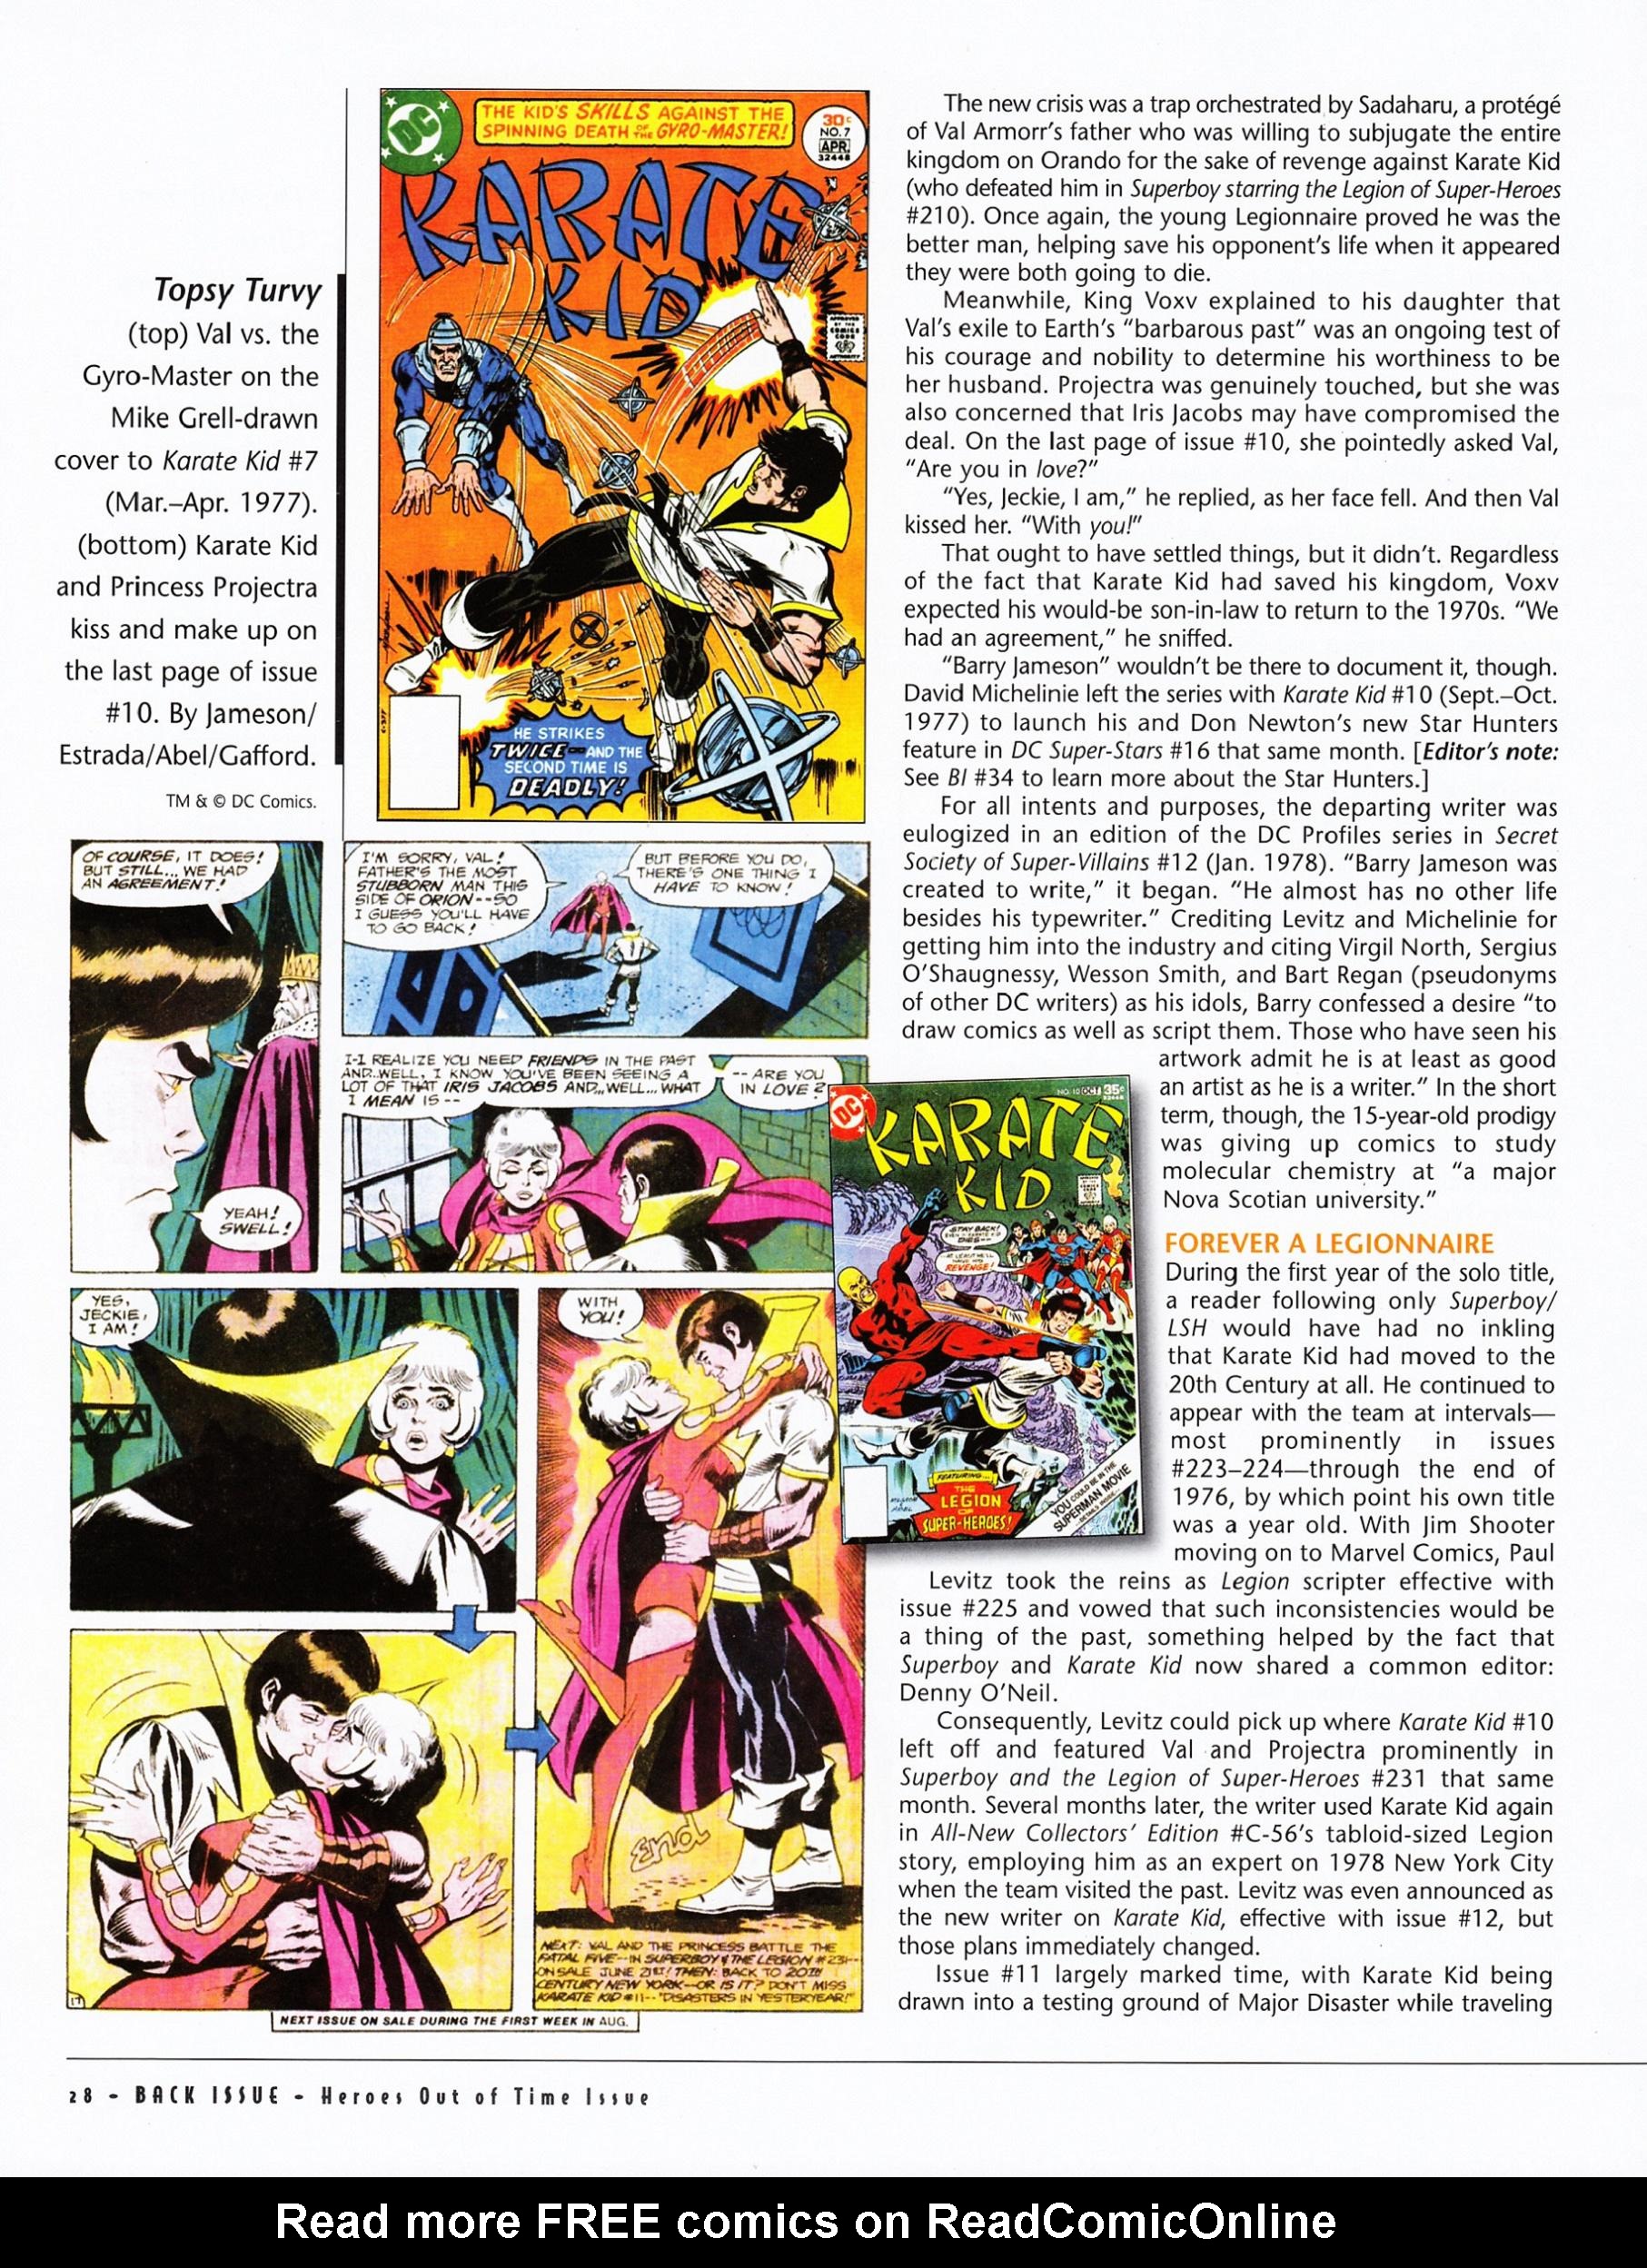 Read online Back Issue comic -  Issue #67 - 30